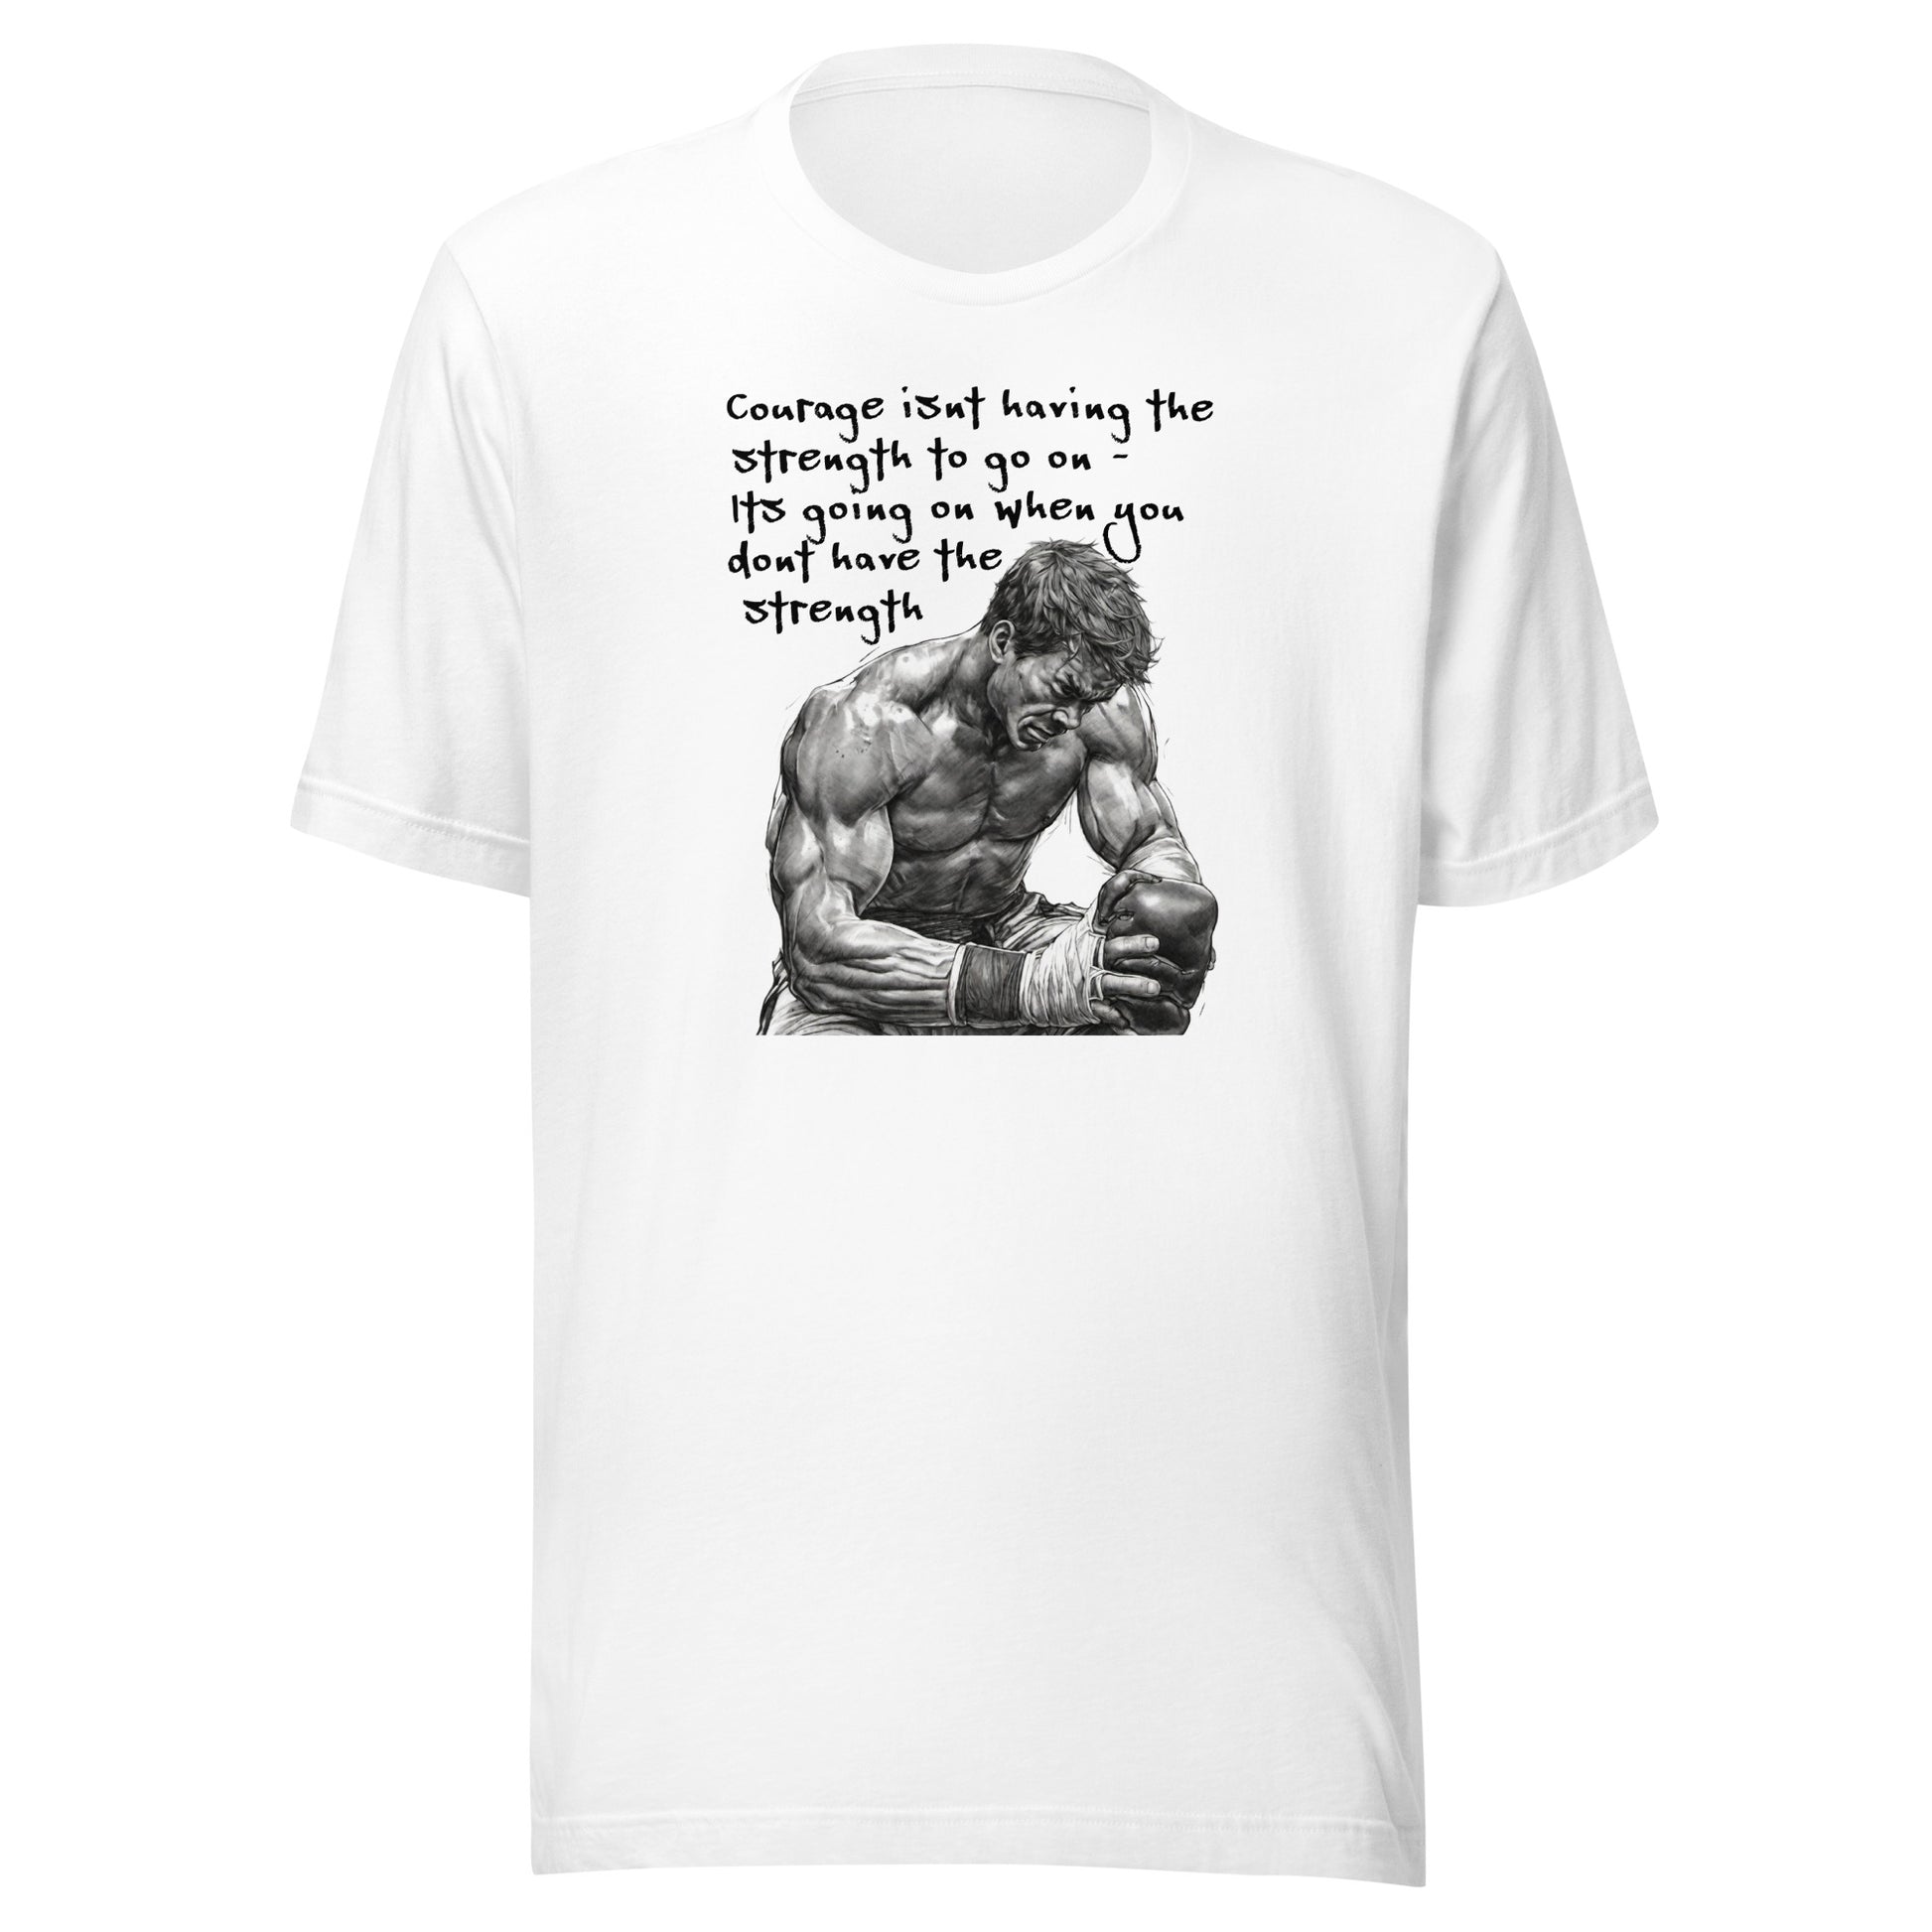 Courage and Strength Men's Graphic T-Shirt White